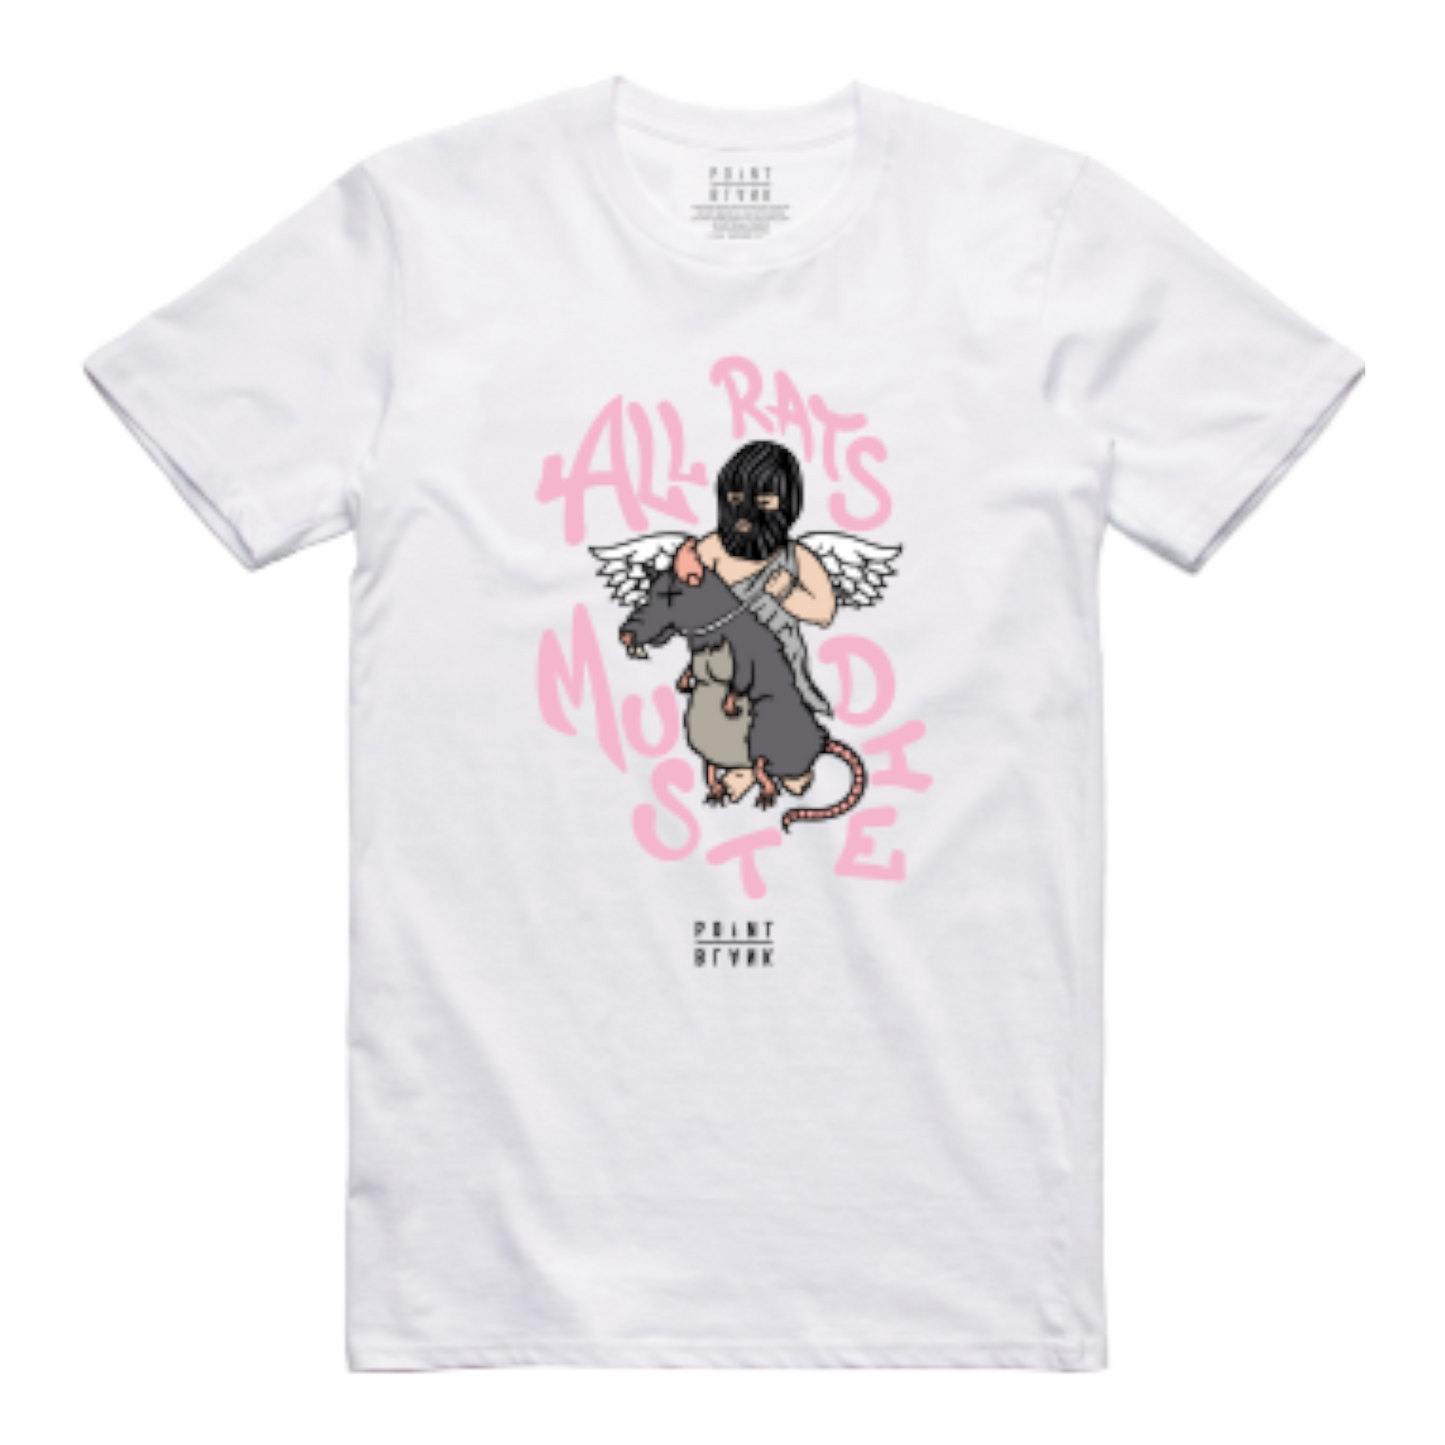 All Rats Must Die T-Shirt (White / Pink)